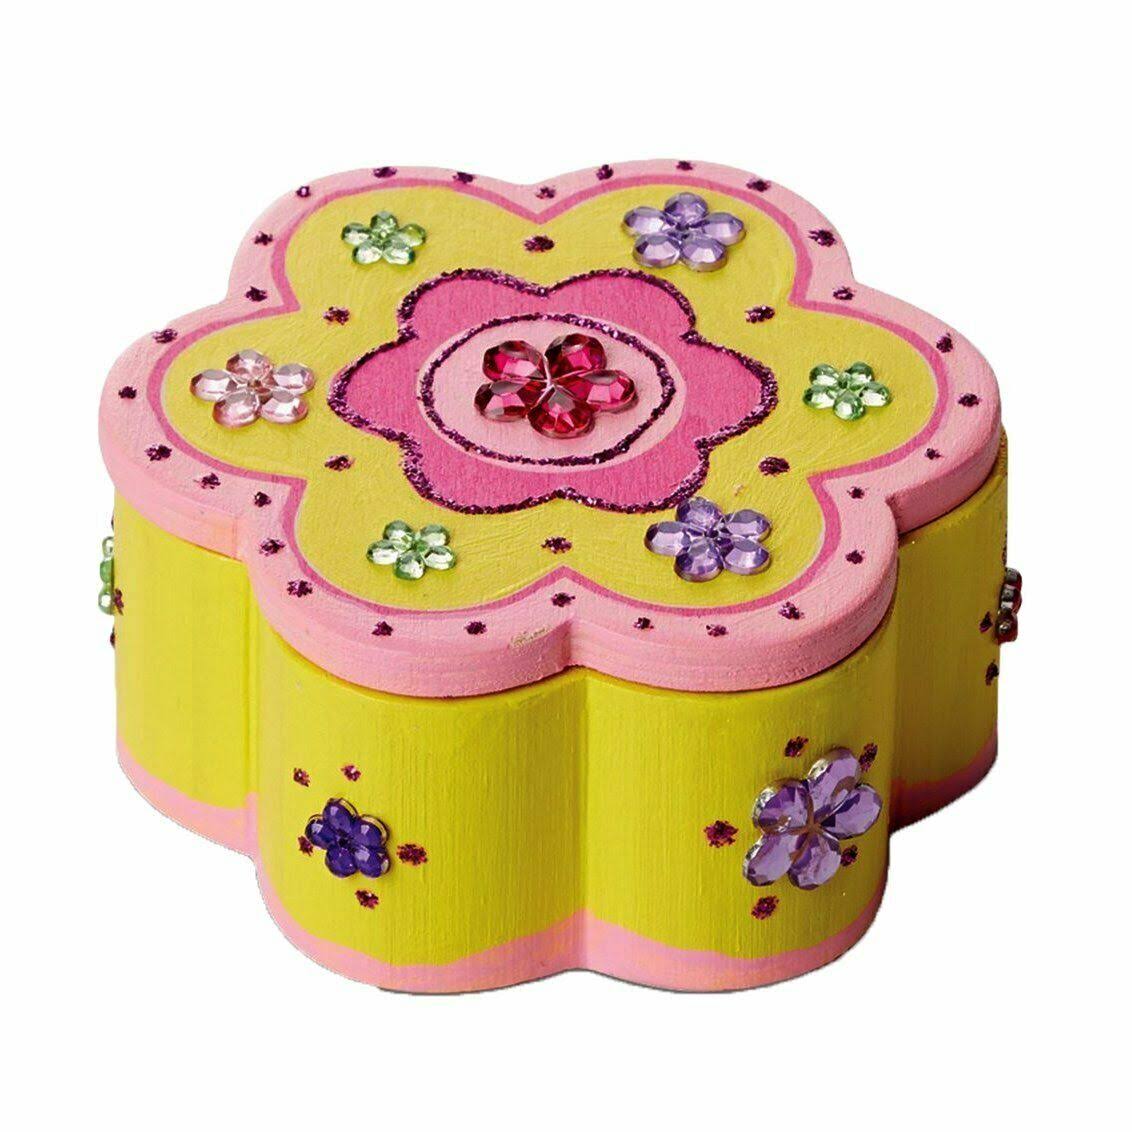 Melissa & Doug Decorate Your Own Wooden Flower Box